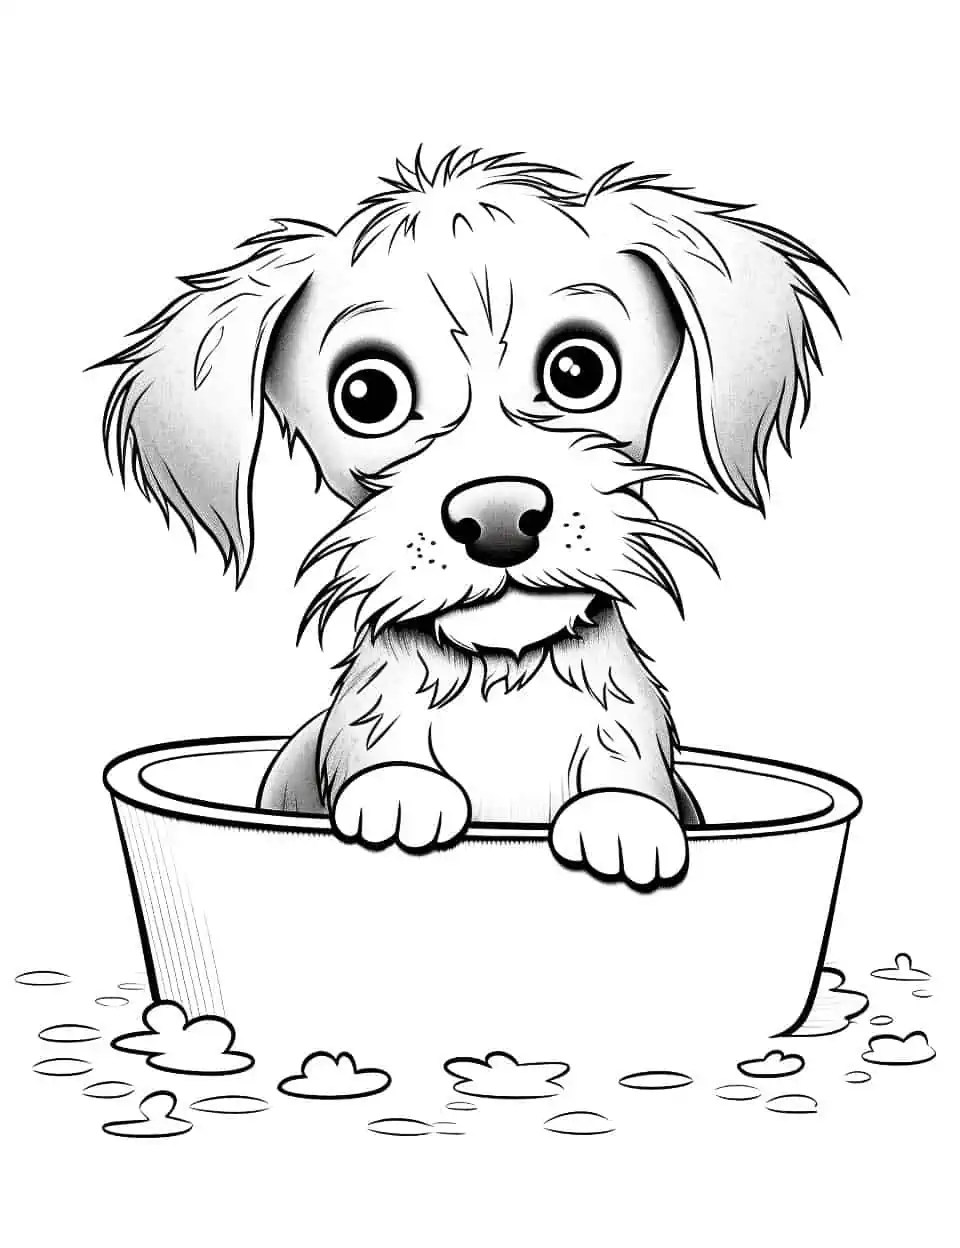 Yorkie Puppy Bath Time Dog Coloring Page - A cute Yorkie puppy’s reactions during bath time.